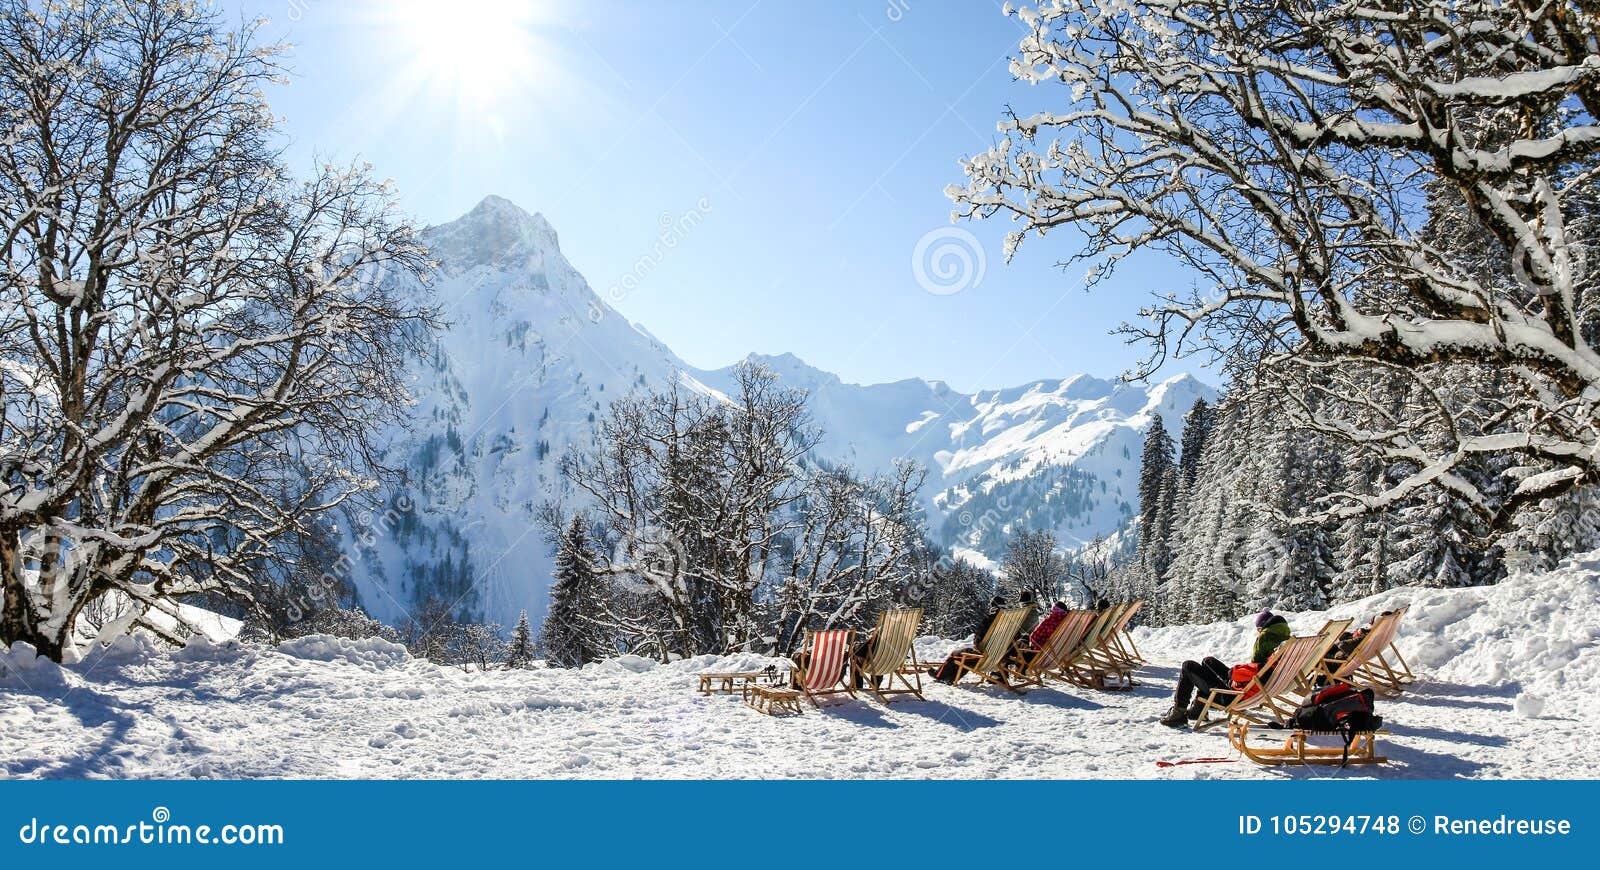 group of people sitting with deck chairs in winter mountains. sunbathing in snow. germany, bavaria, allgau